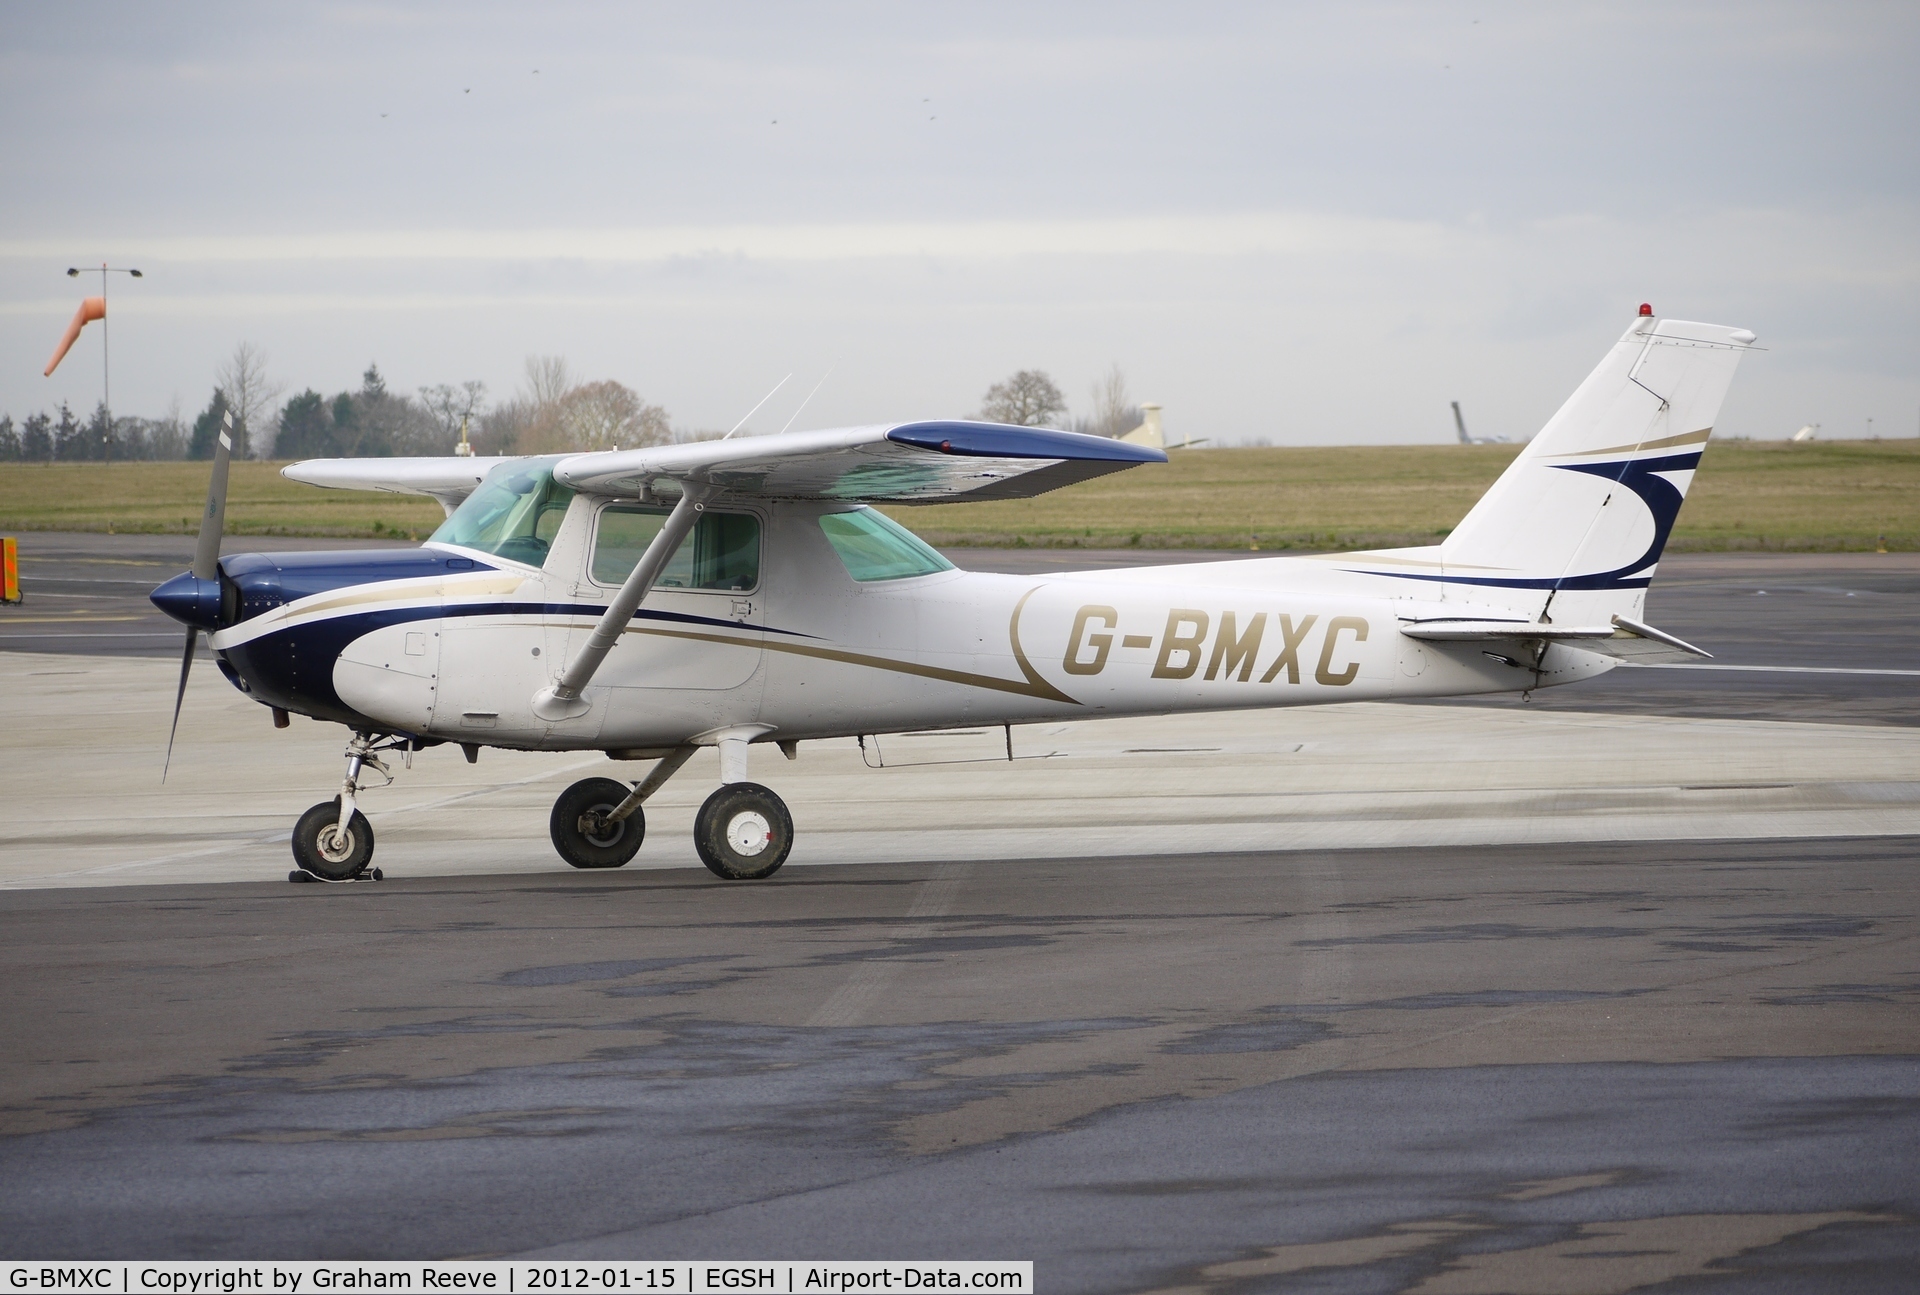 G-BMXC, 1977 Cessna 152 C/N 152-80416, Parked at Norwich.